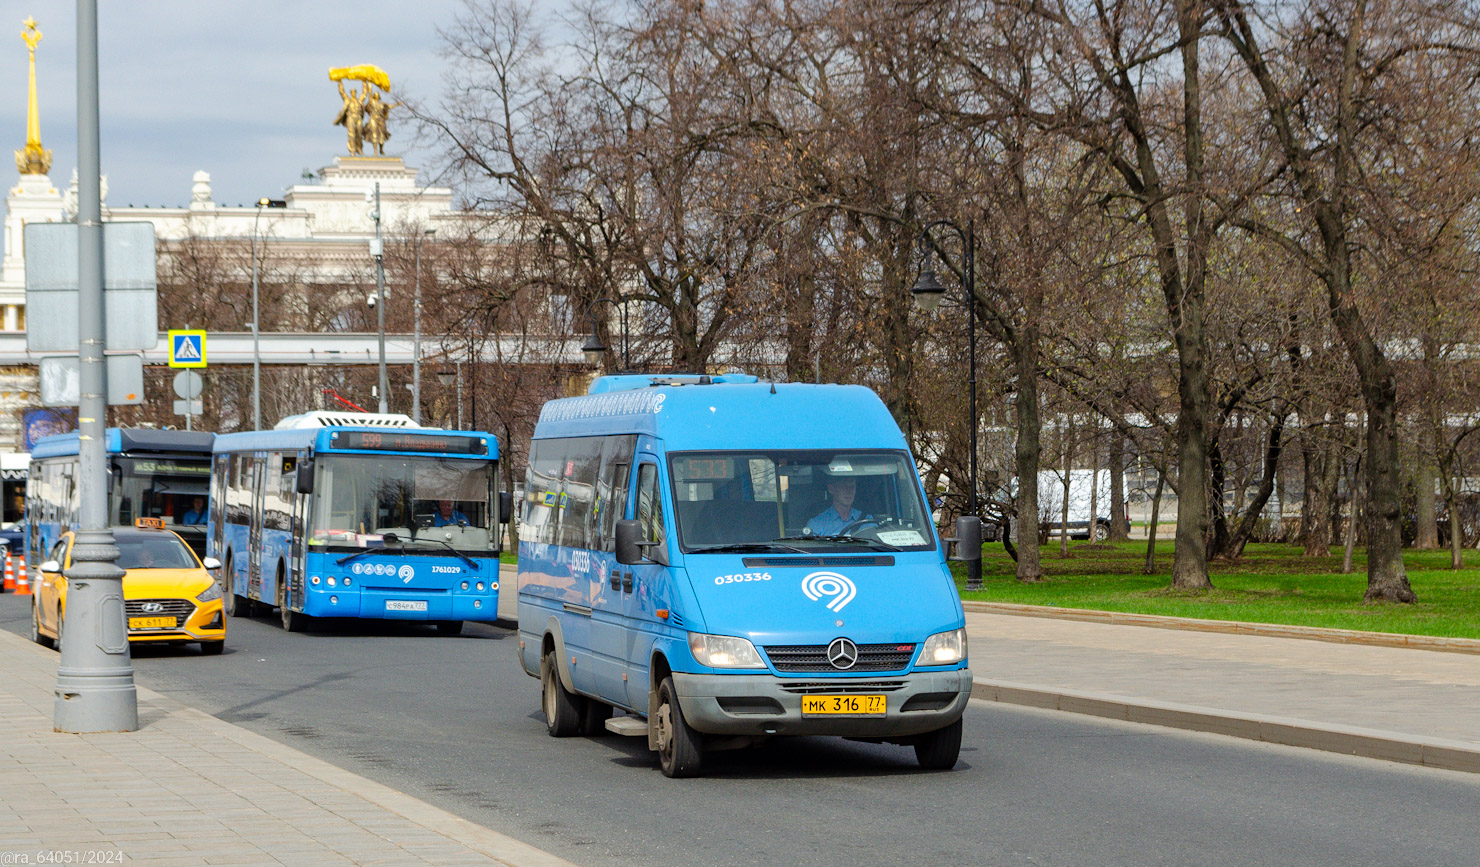 Moscow, Luidor-223206 (MB Sprinter Classic) # 030336